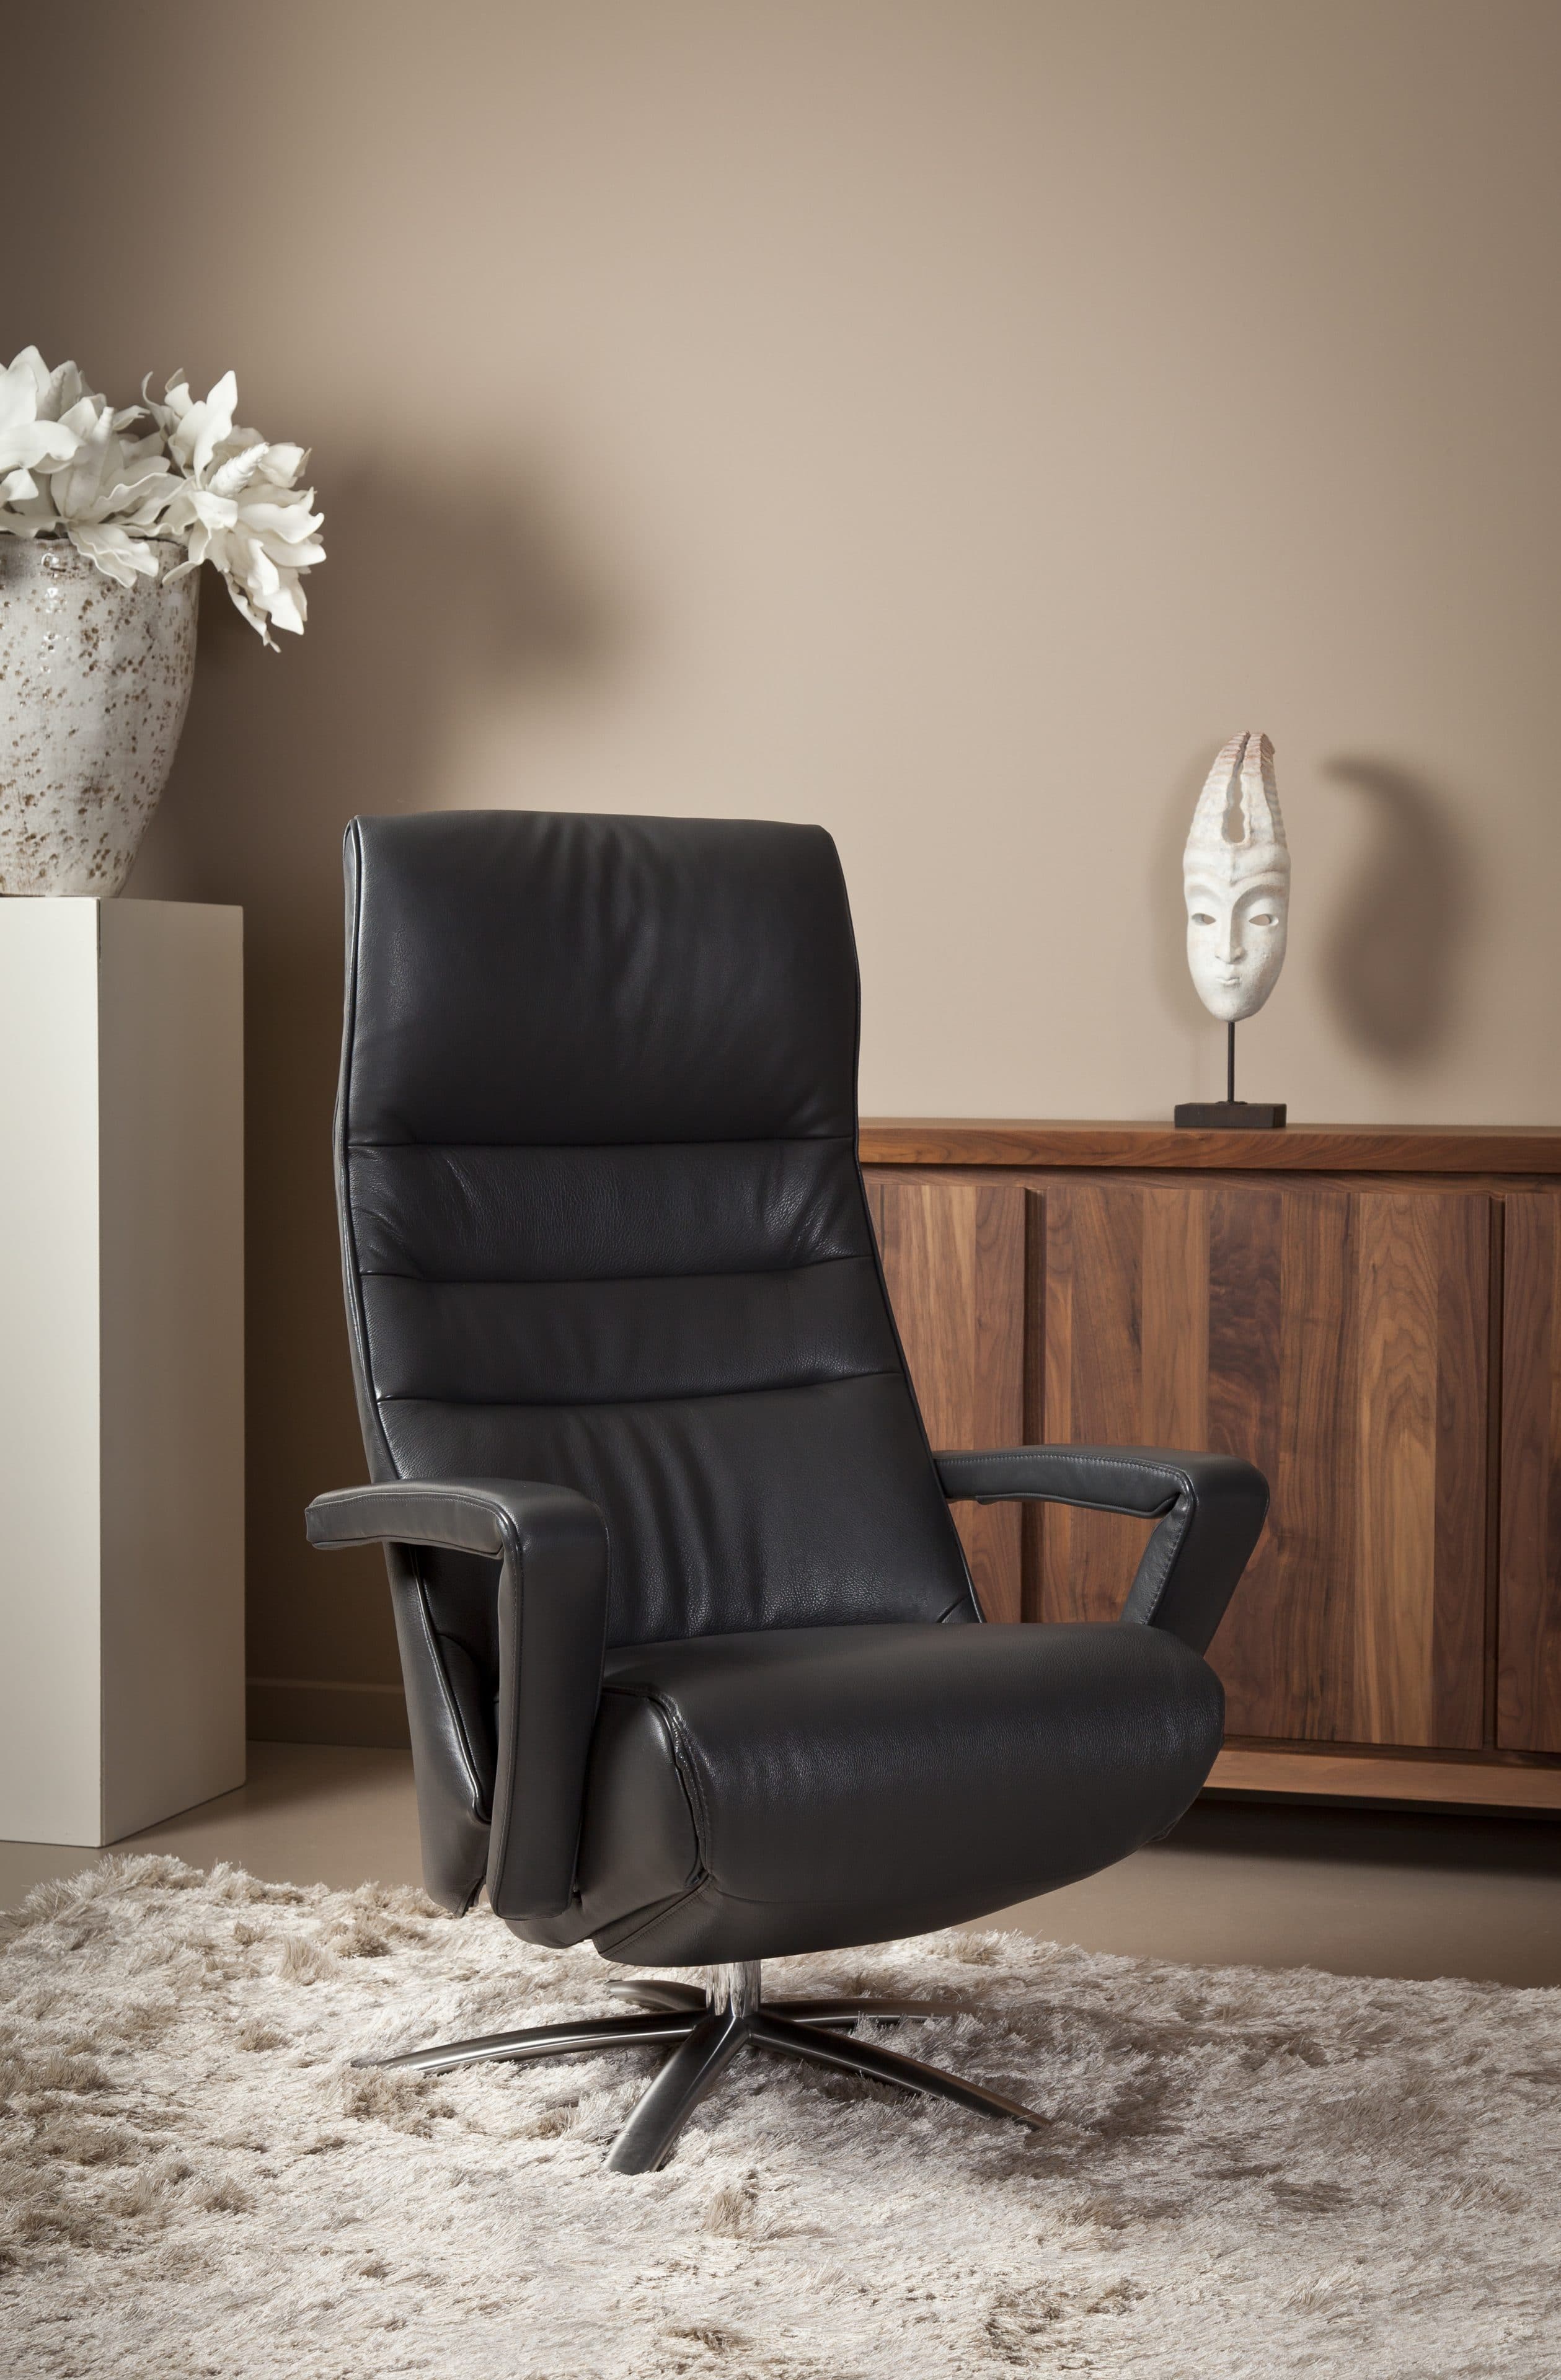 Relaxfauteuil Twice Tw005